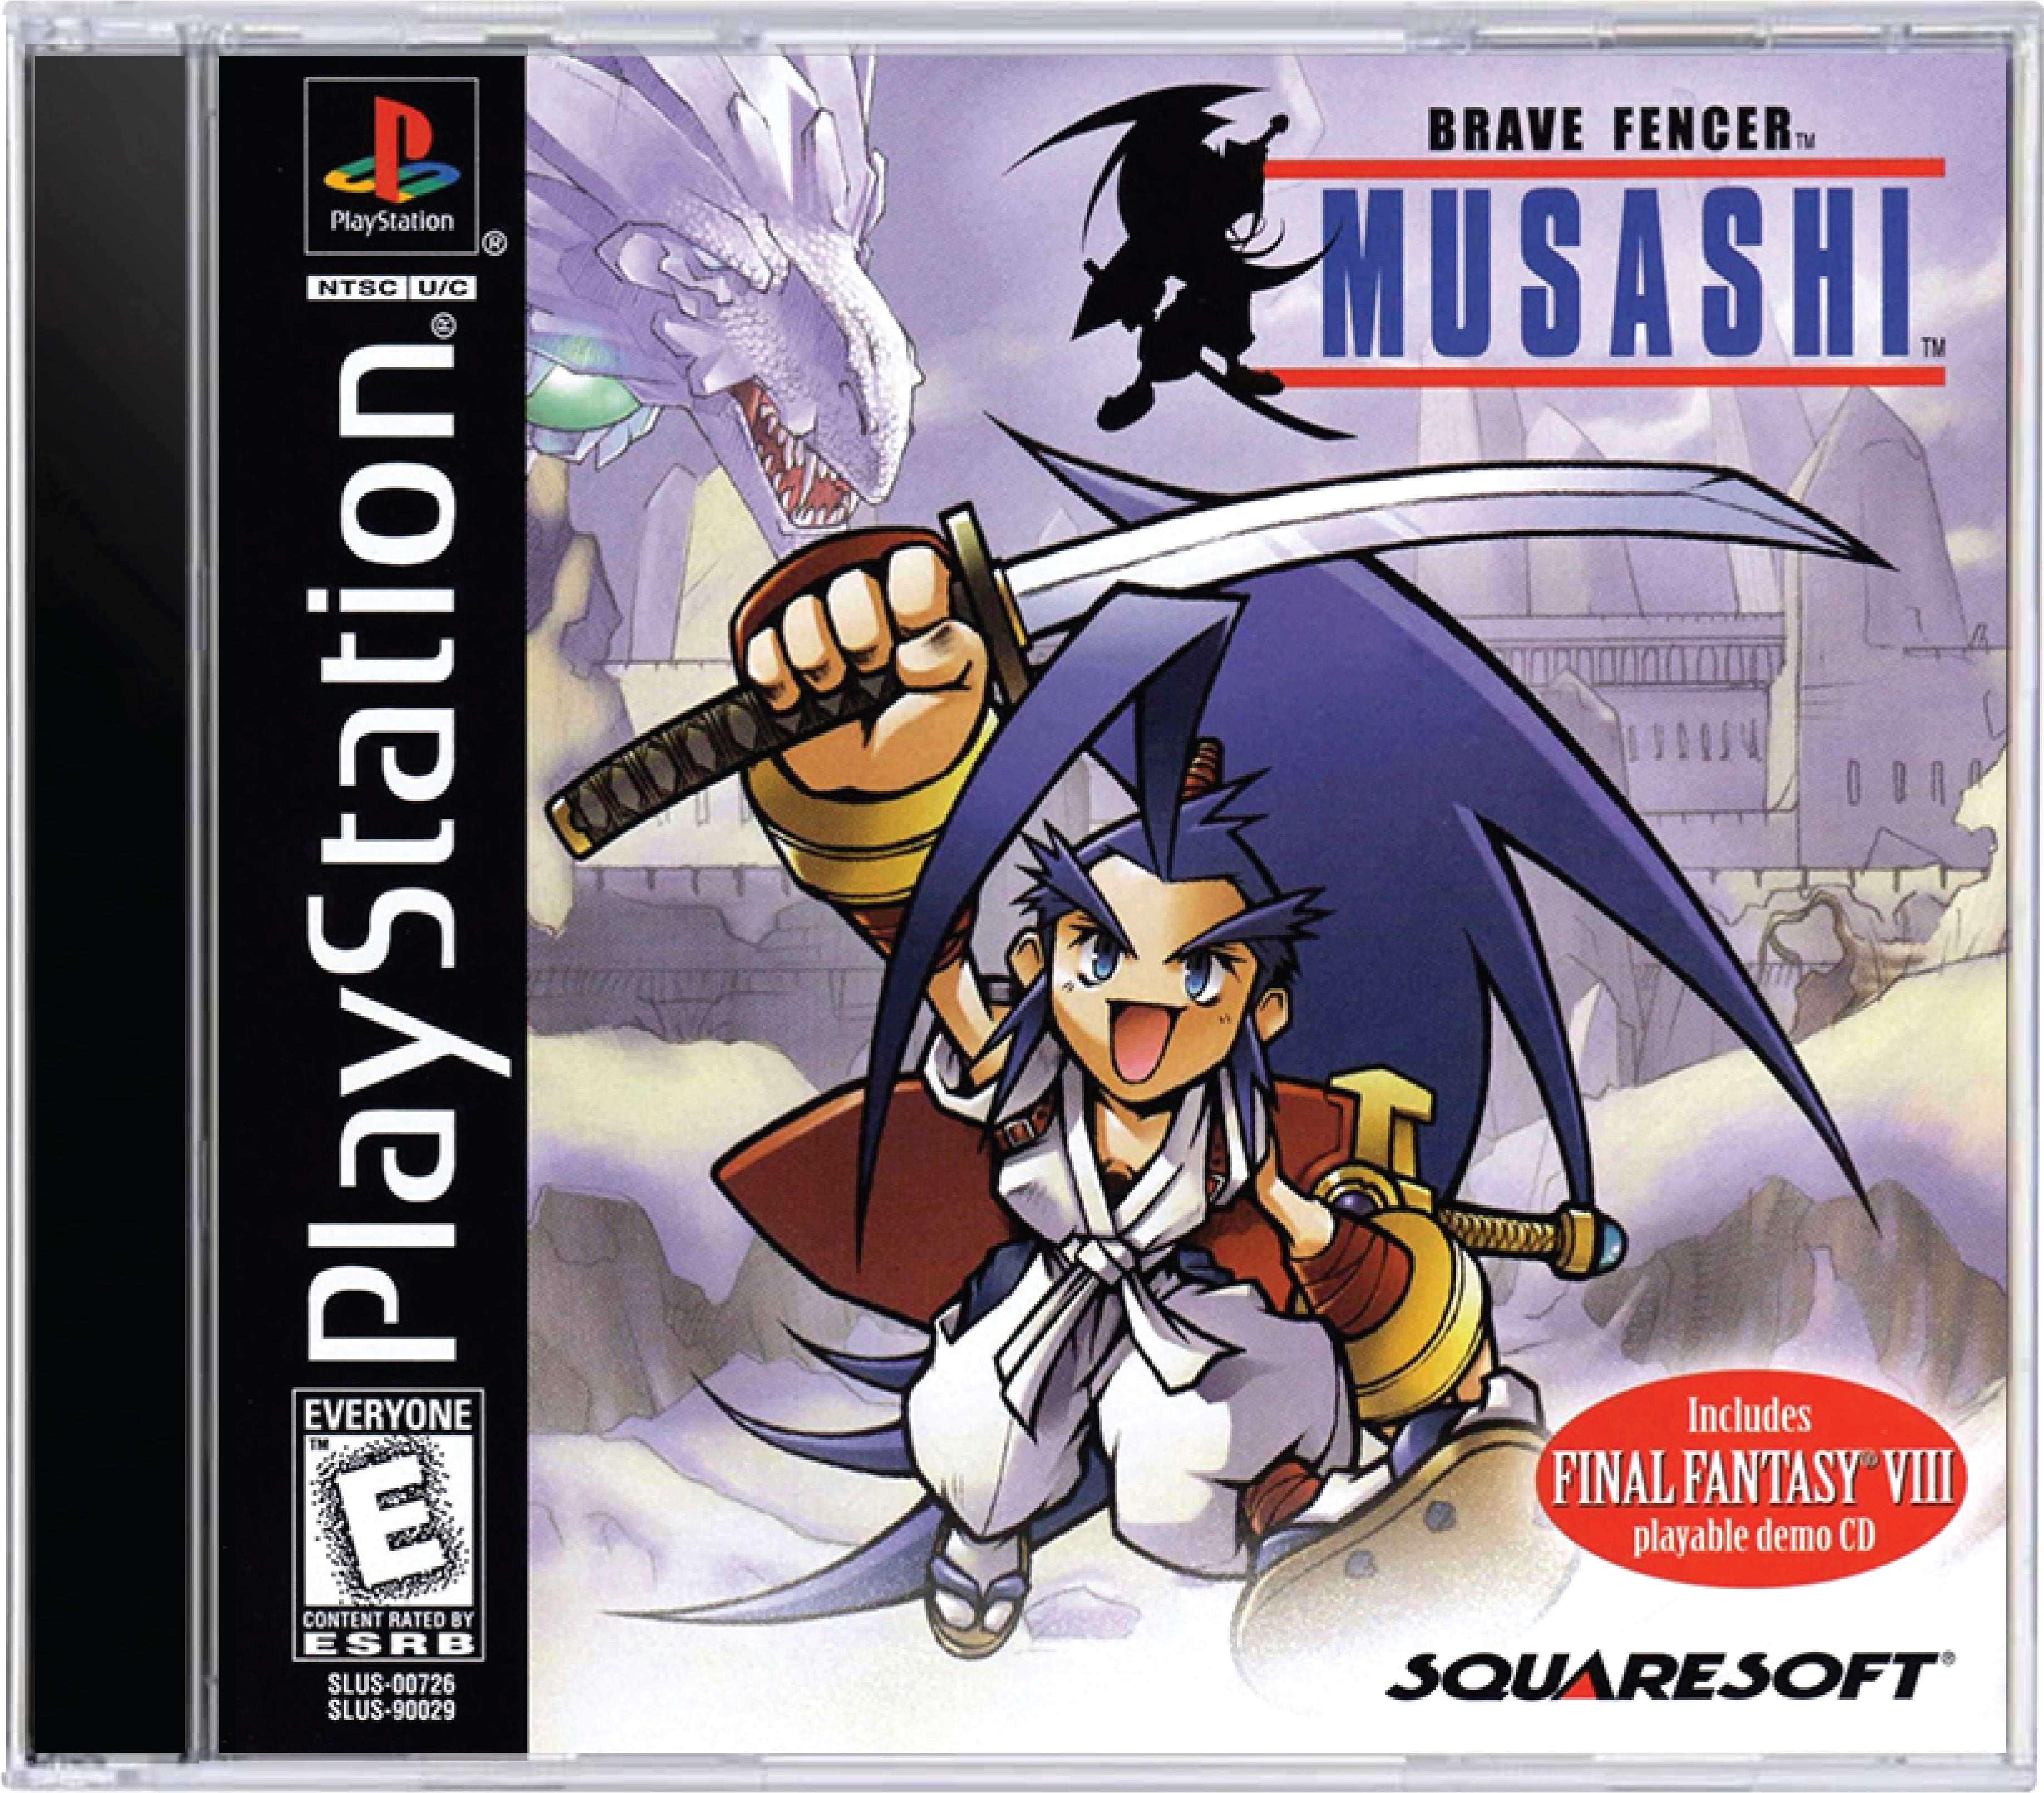 Brave Fencer Musashi Cover Art and Product Photo